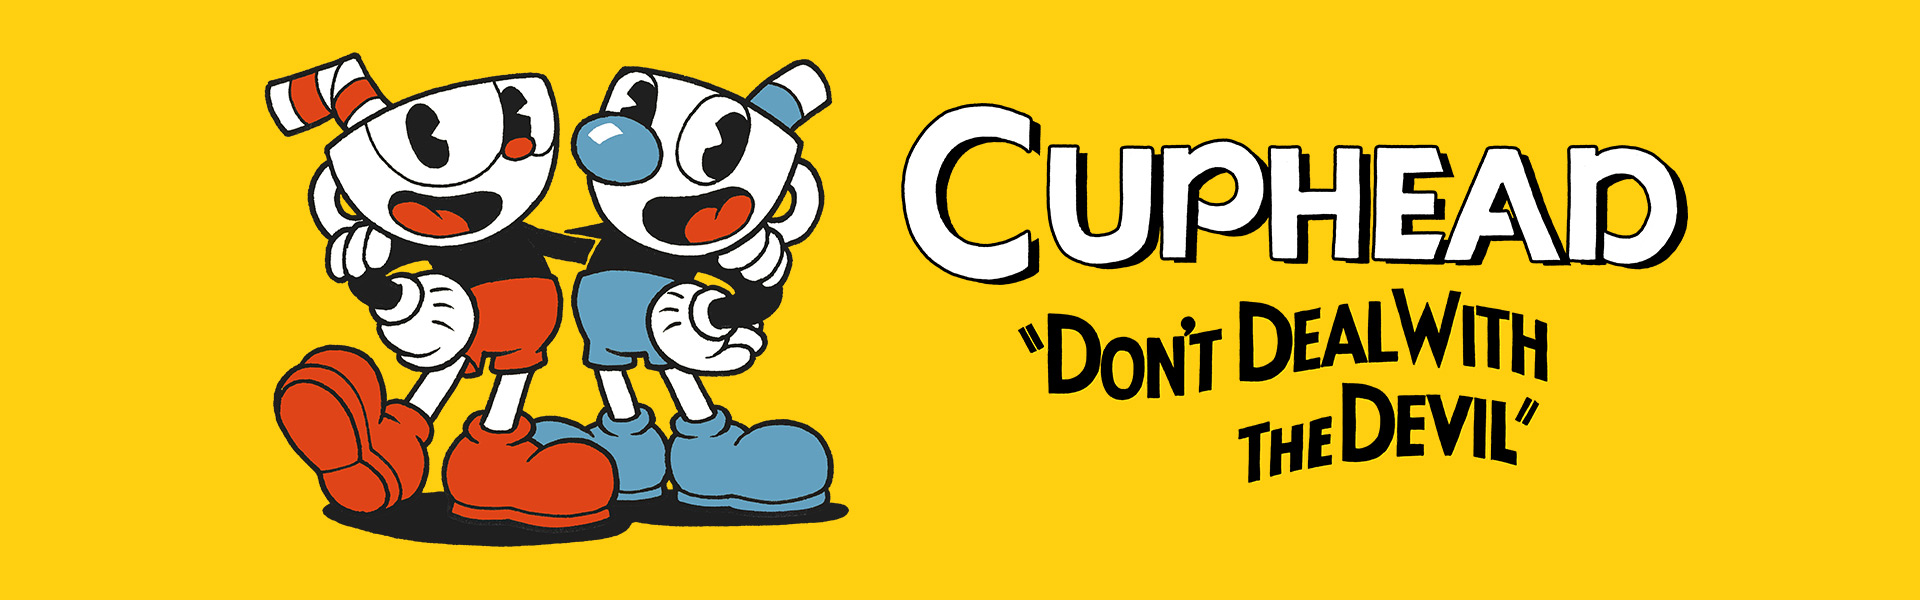 PC / Computer - Cuphead: Don't Deal With the Devil! - King Dice